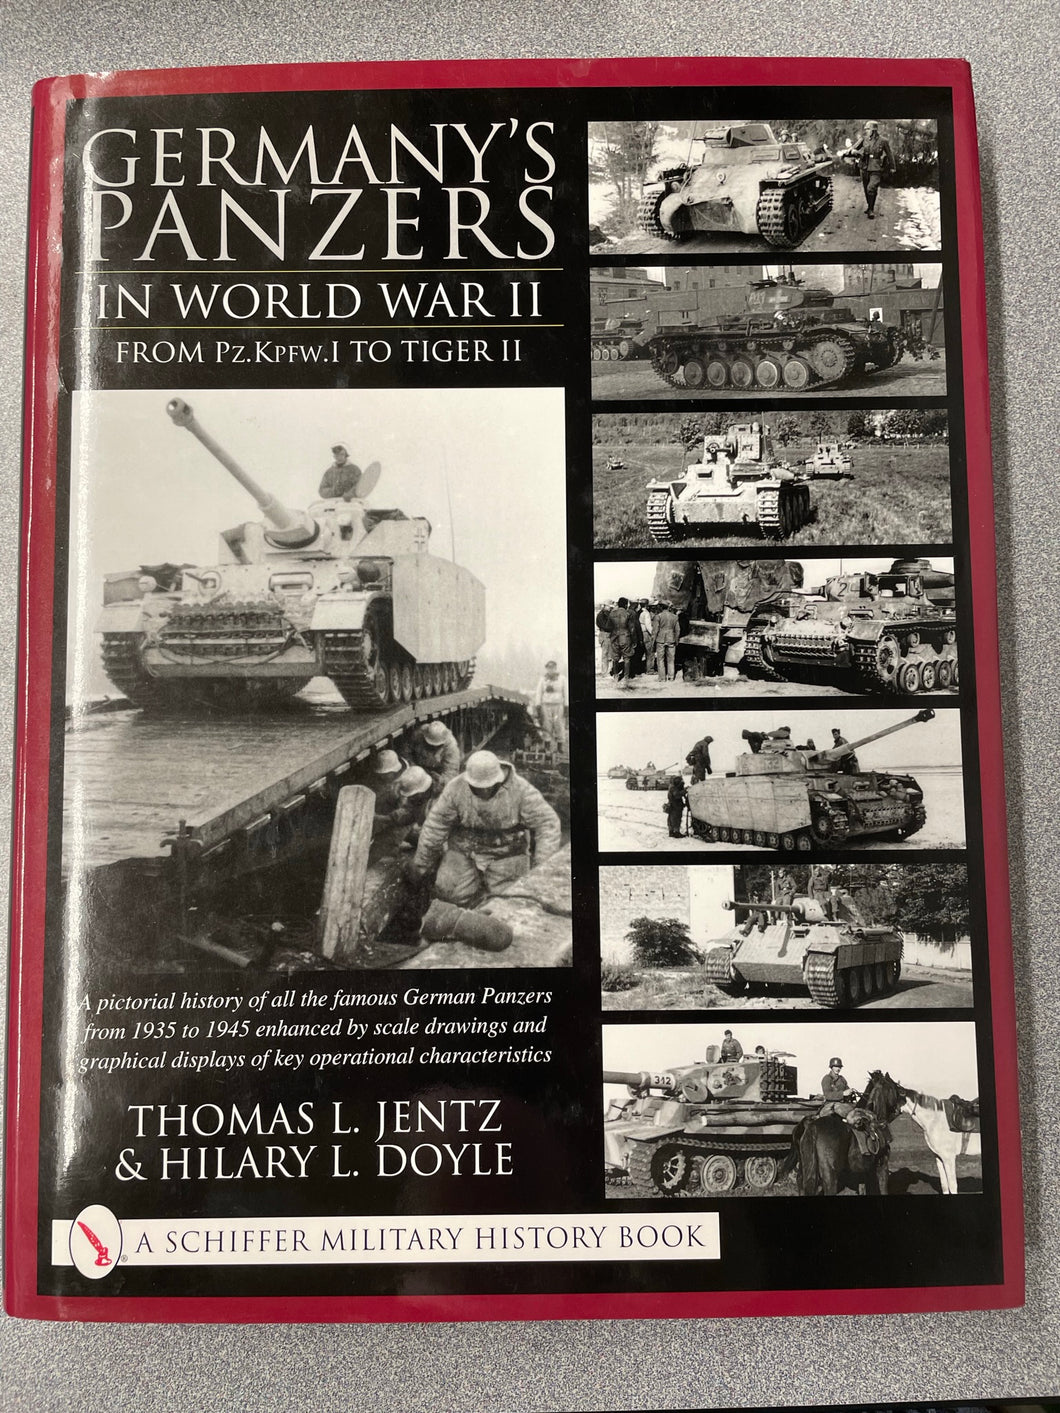 Germany's Panzers in World War II, From Pz.Kpfw.I to Tiger II, Jentz, Thomas L. and Hilary L. Doyle [2001] ML 9/23